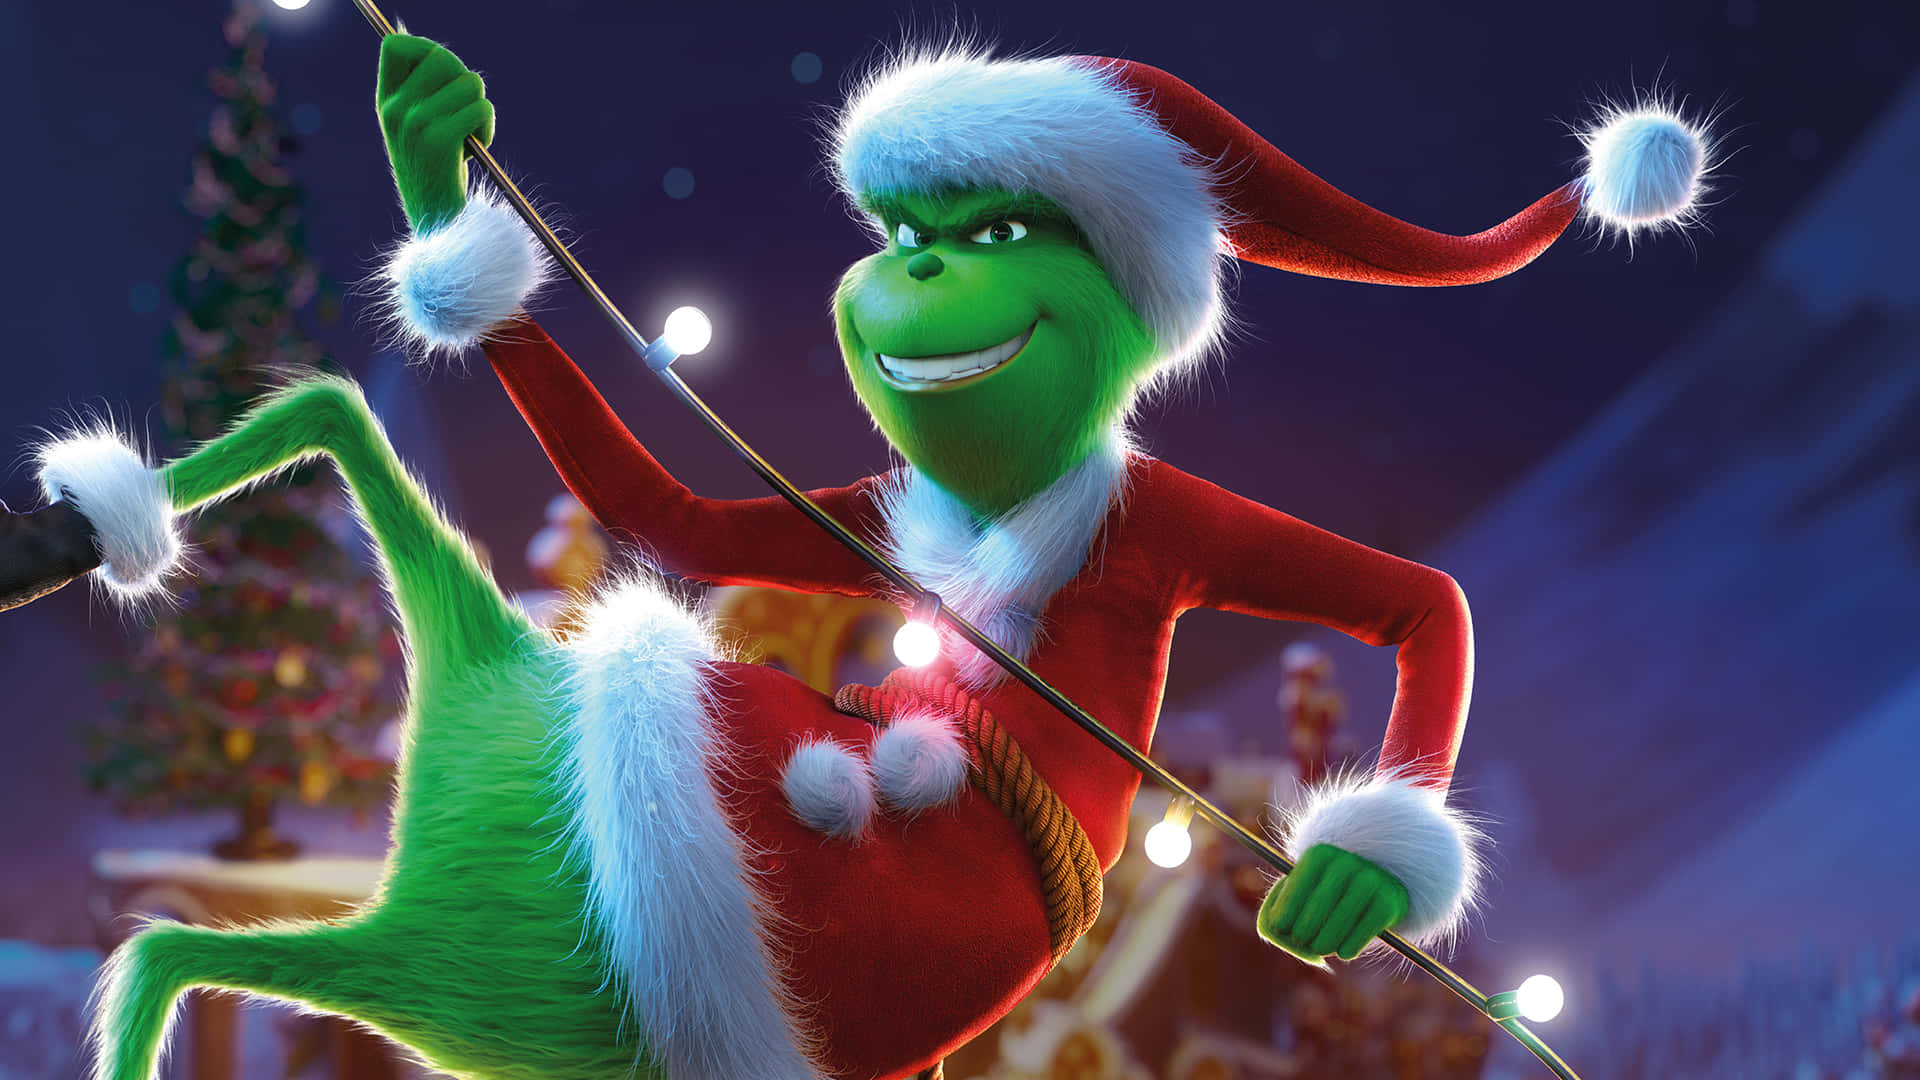 The Grinch Pictures Wallpaper